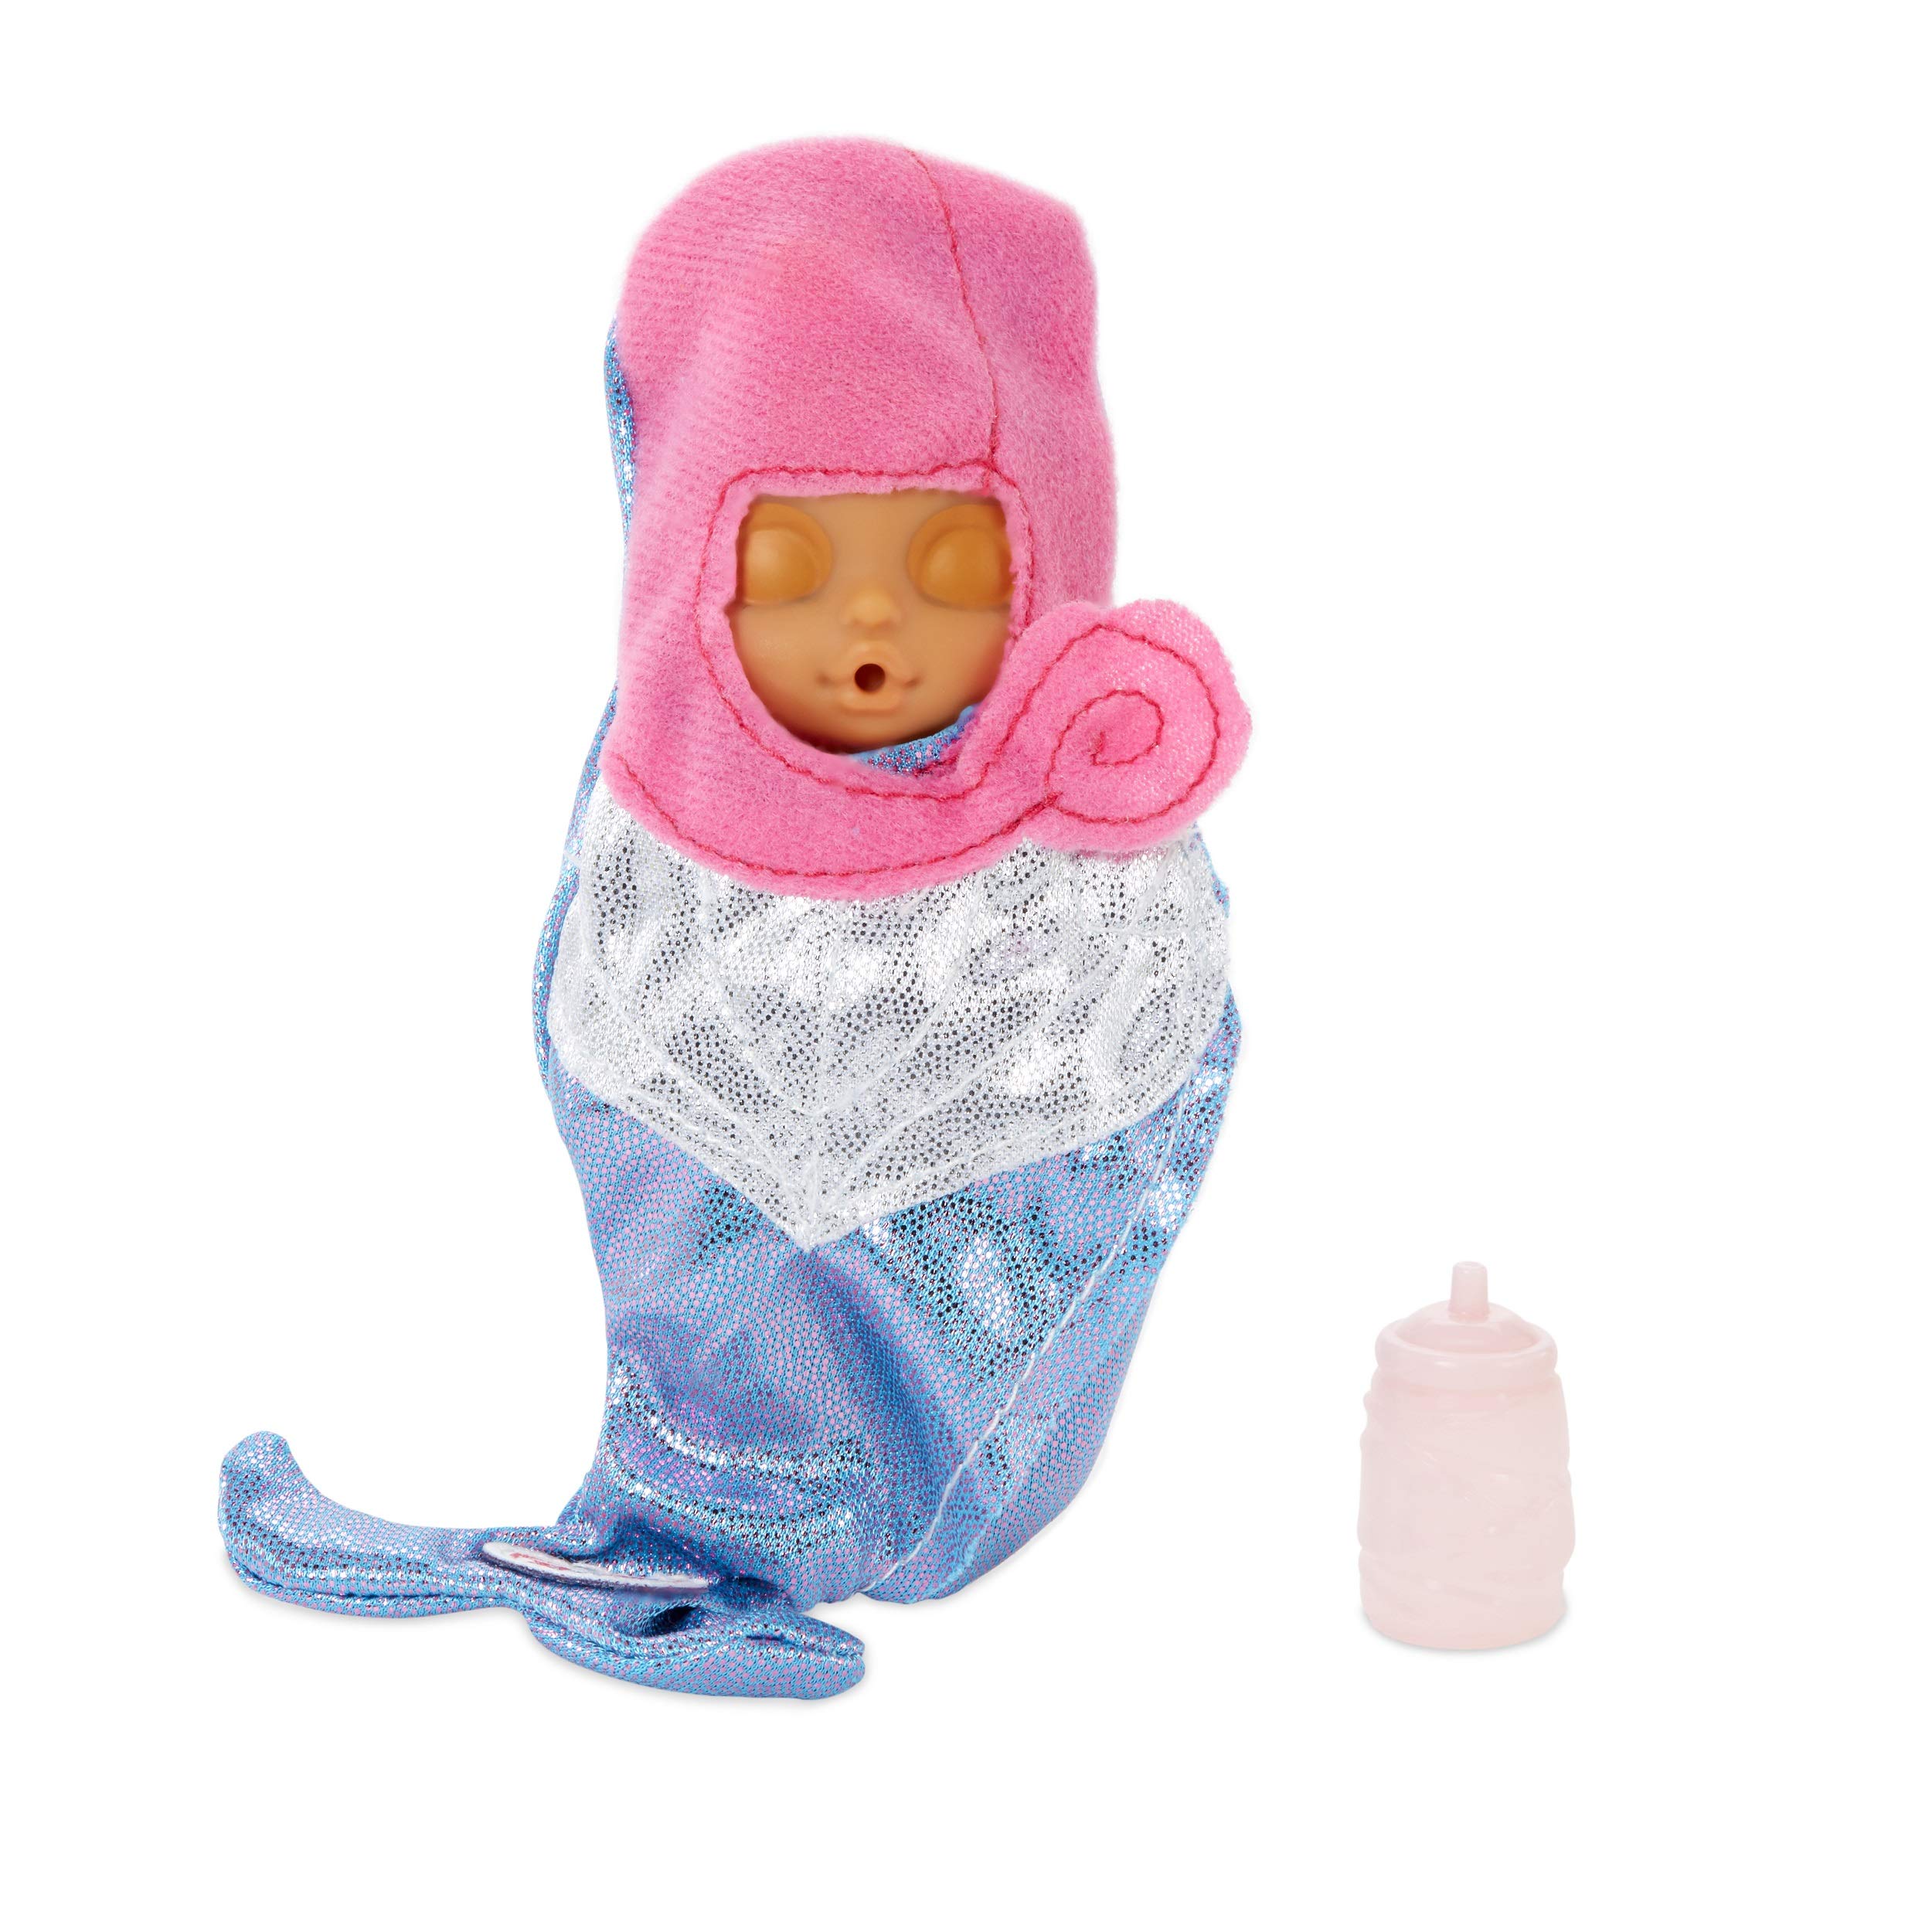 Baby Born Surprise Collectible Baby Dolls with Color Change Diaper, Multicolor